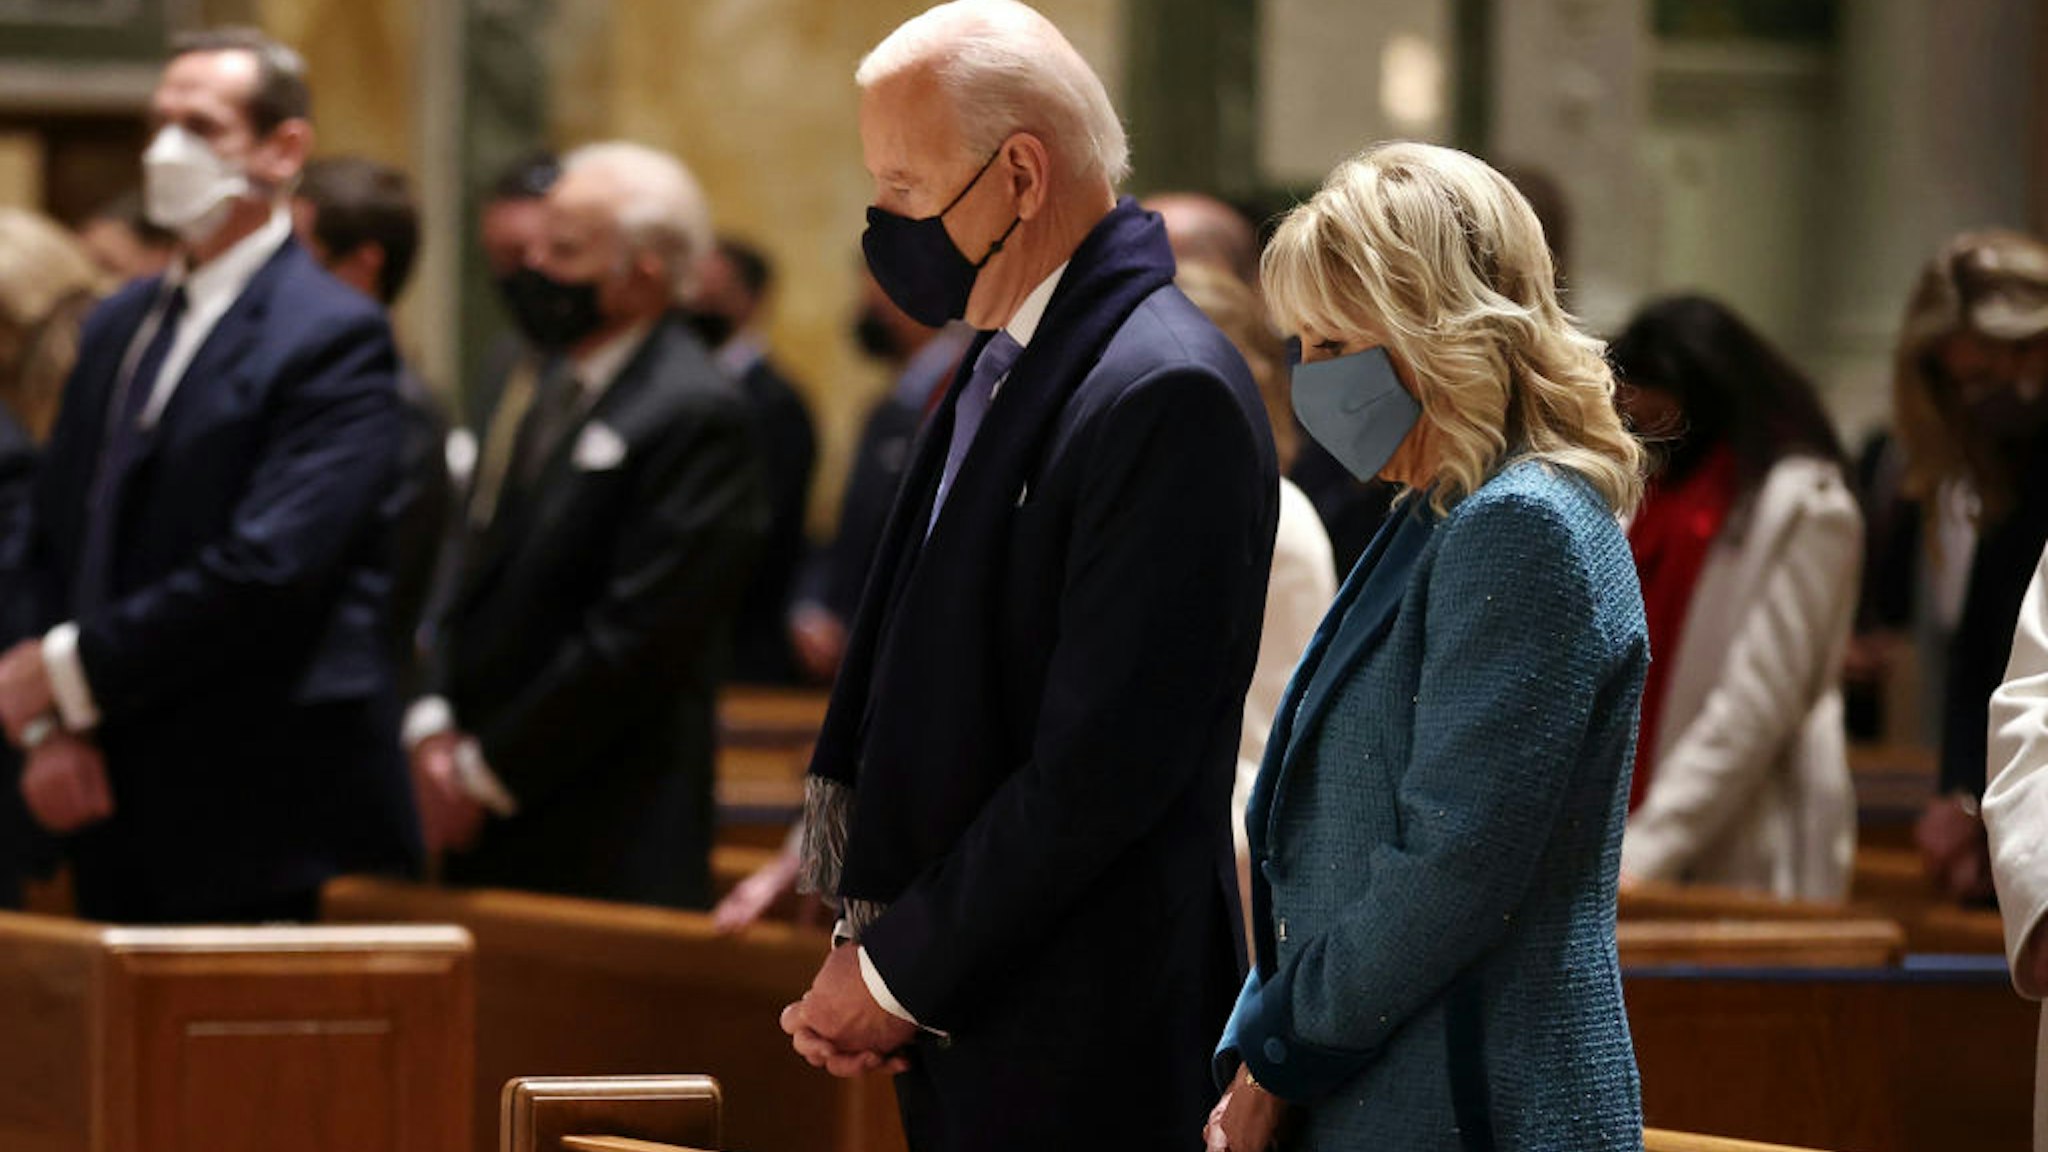 U.S. President-elect Joe Biden and Dr. Jill Biden attend services at the Cathedral of St. Matthew the Apostle with Congressional leaders prior the 59th Presidential Inauguration ceremony on January 20, 2021 in Washington, DC. During today's inauguration ceremony Joe Biden becomes the 46th president of the United States.